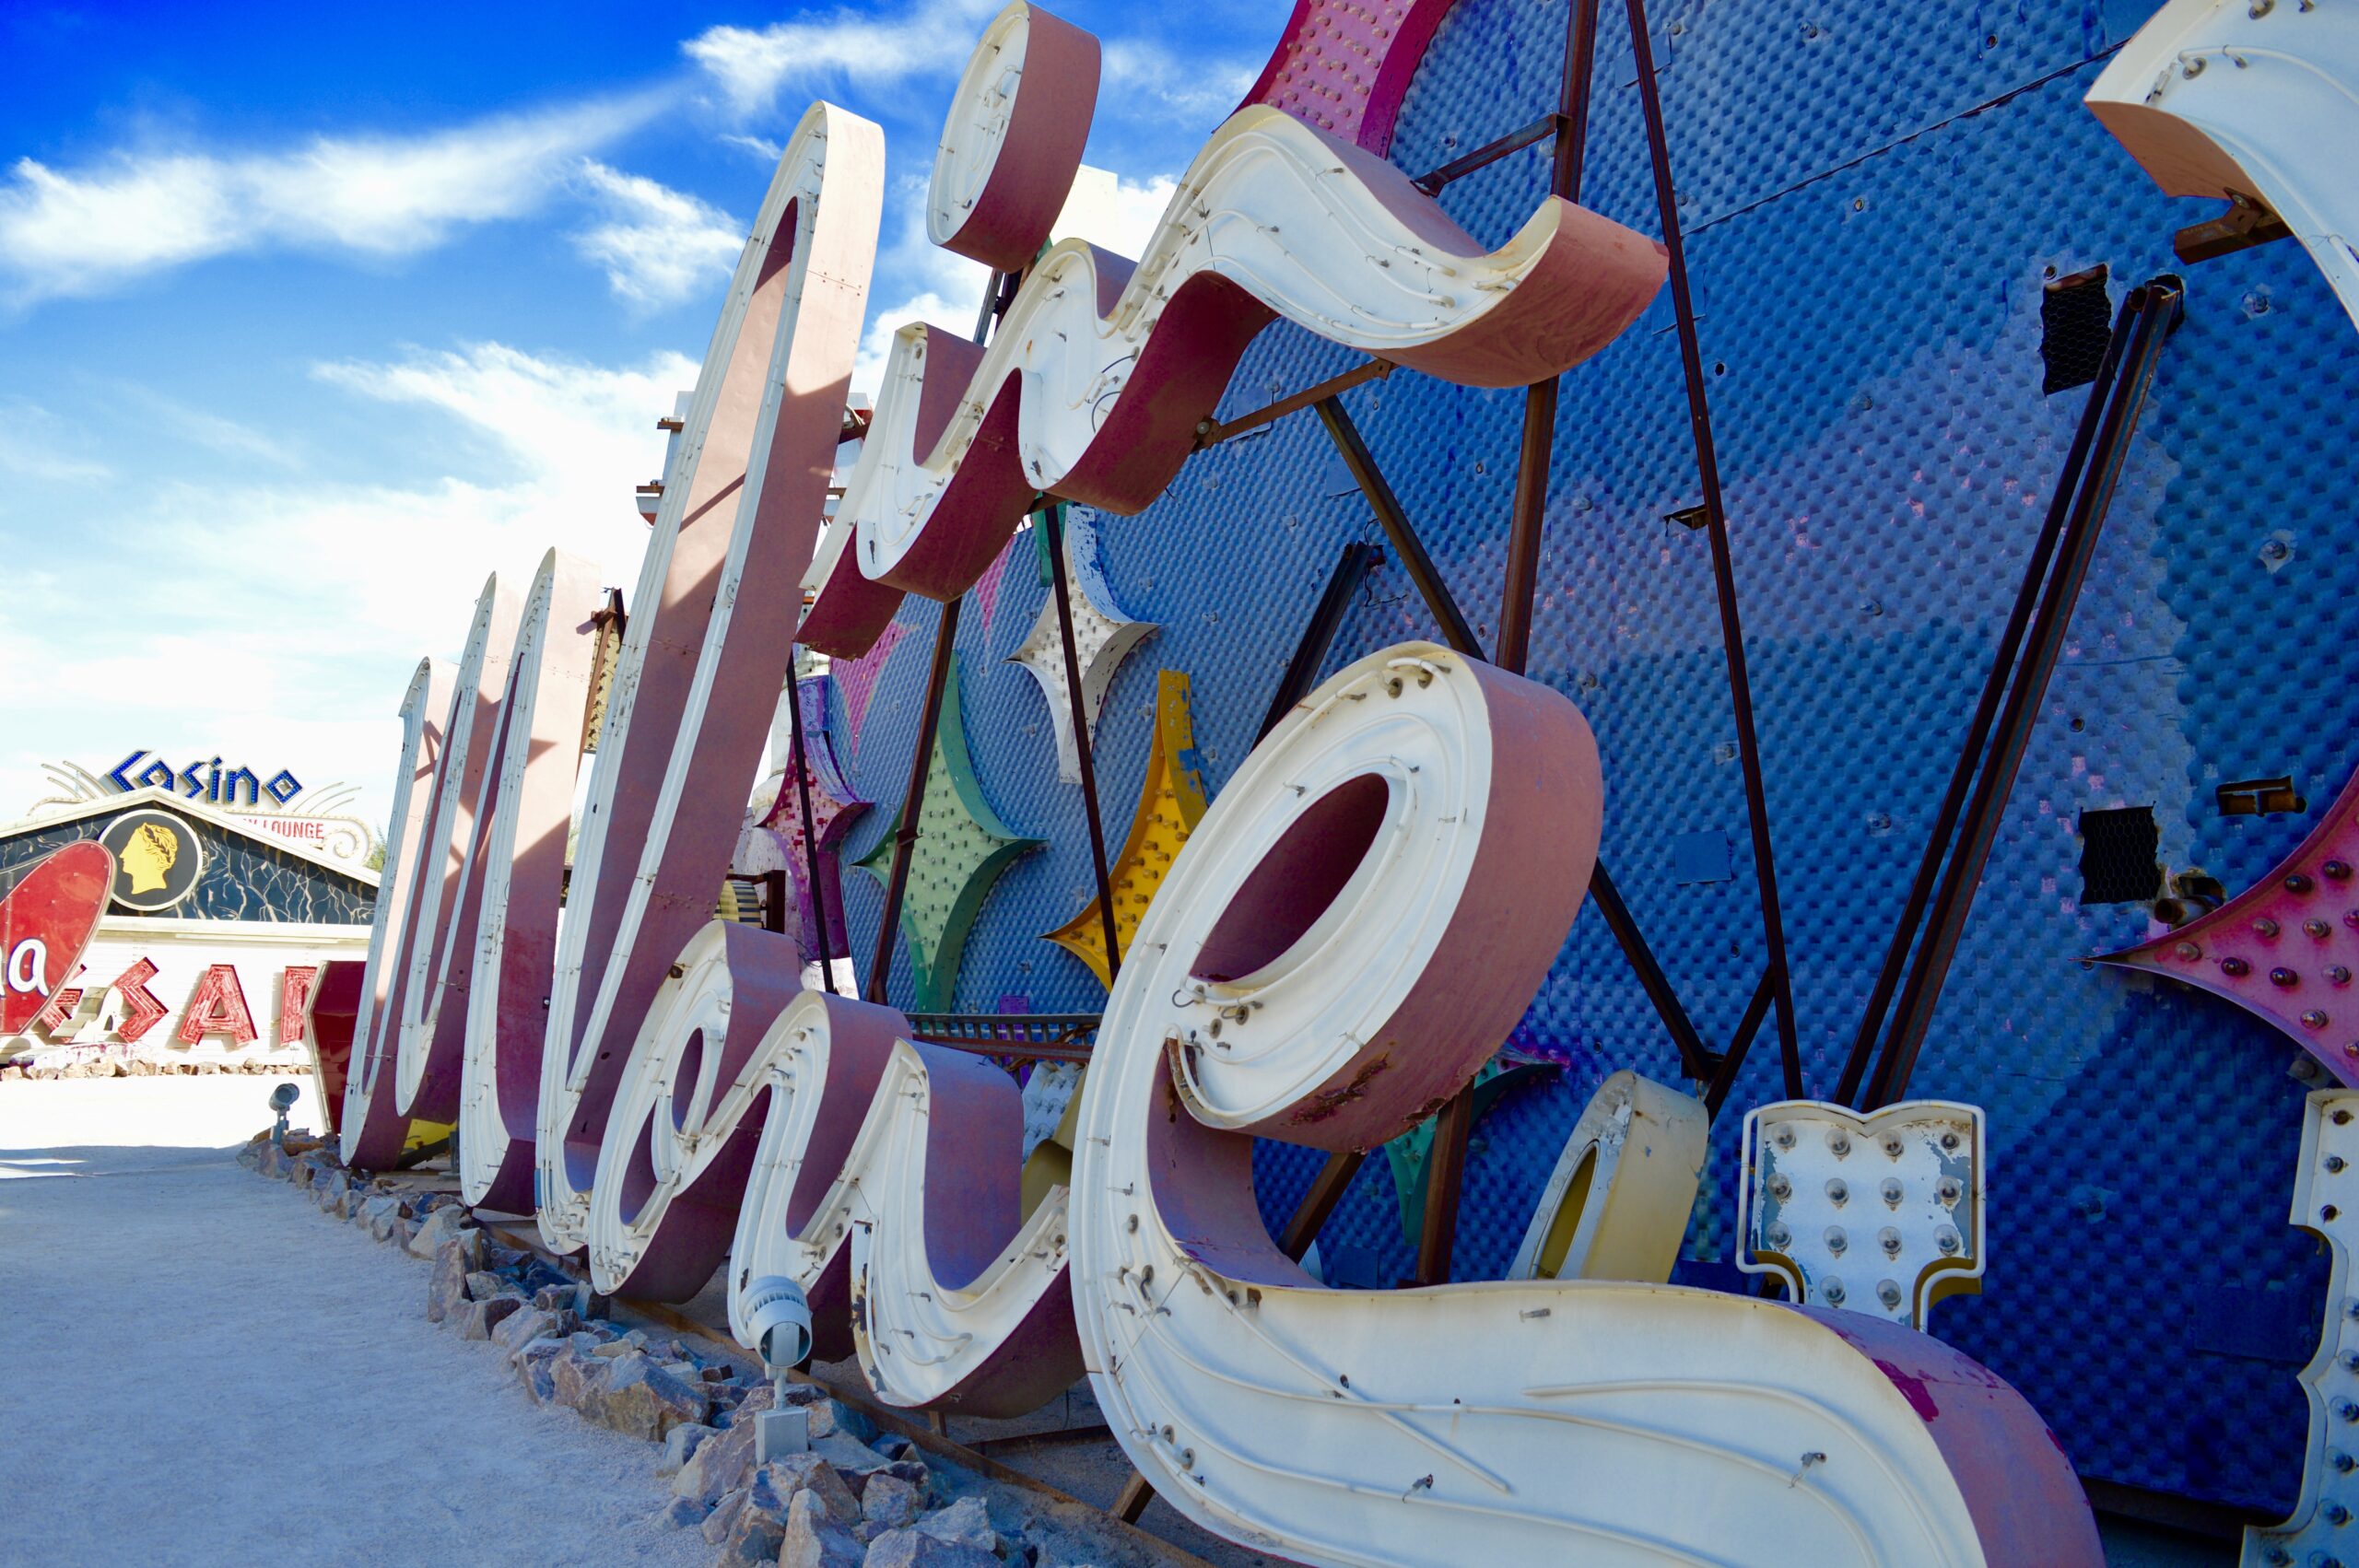 Moulin Rouge The Neon Boneyard Museum | Top 5 things to do in Las Vegas | Head to The Strip for the best adventures in Sin City | Travel Guide & Travel Tips | The Social Media Virgin - Mature Luxury Lifestyle Blog